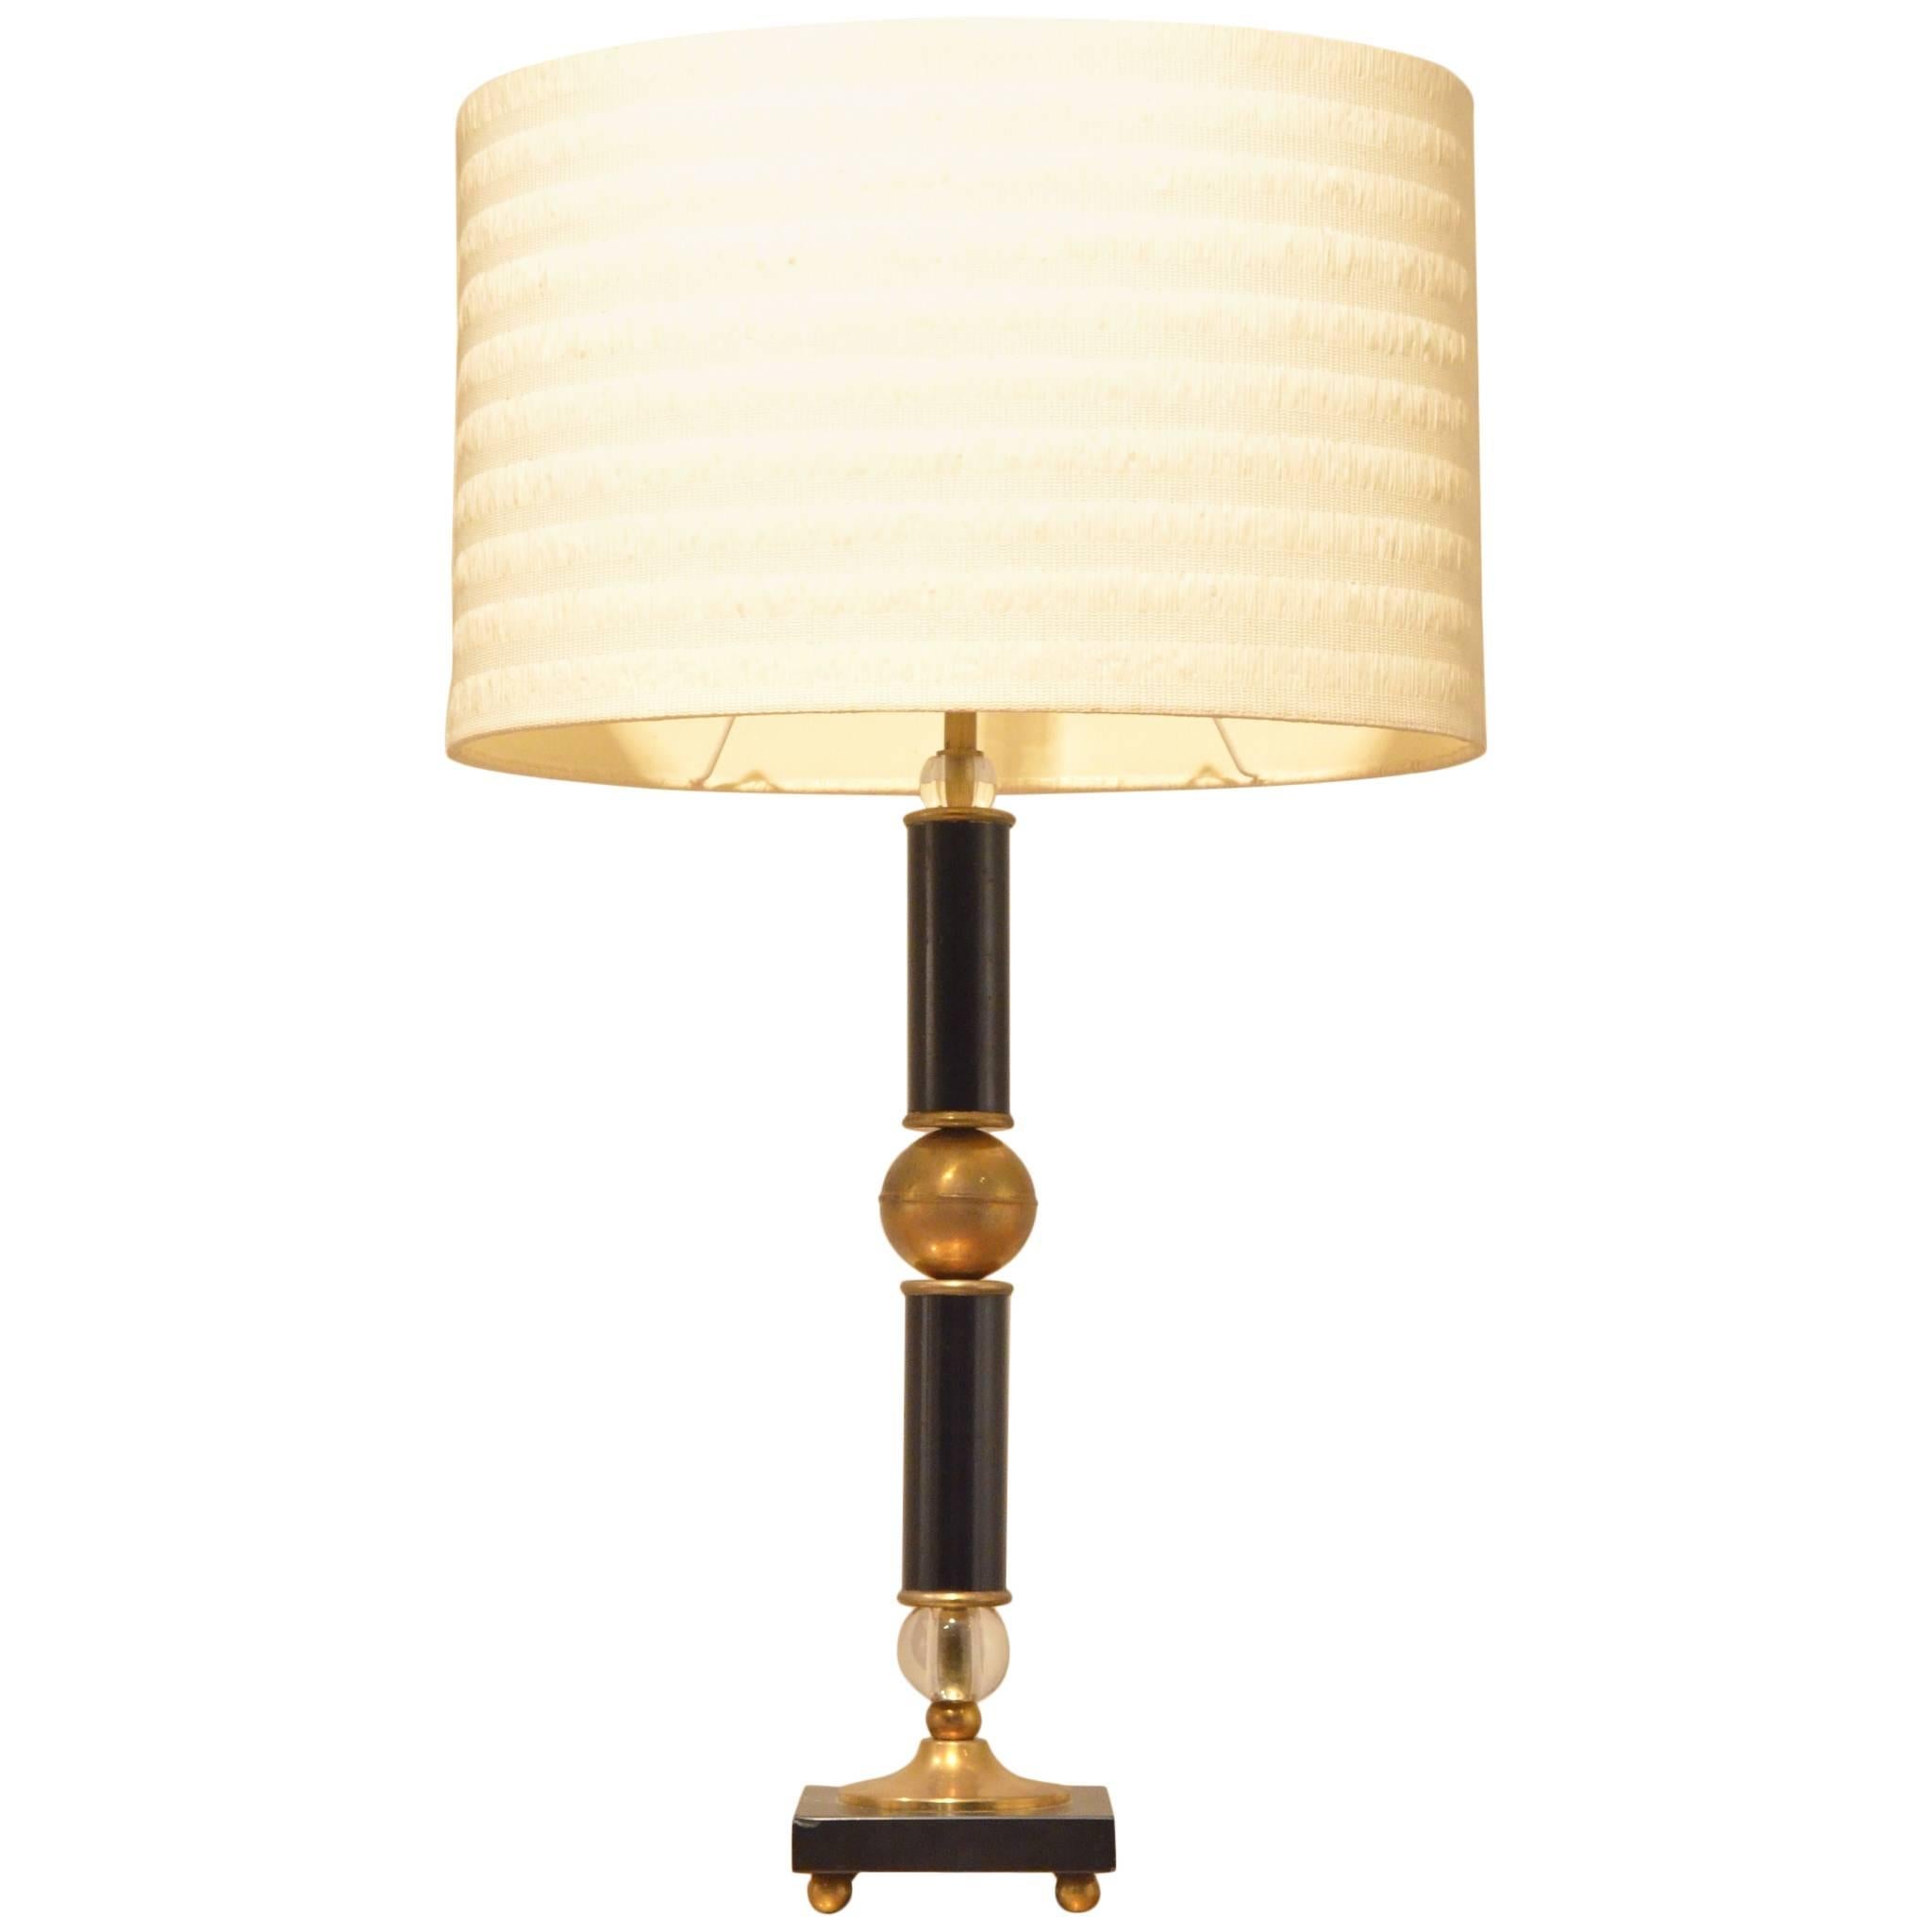 French Mid-Century Glass and Brass Ball Table Lamp Attributed to Jacques Adnet